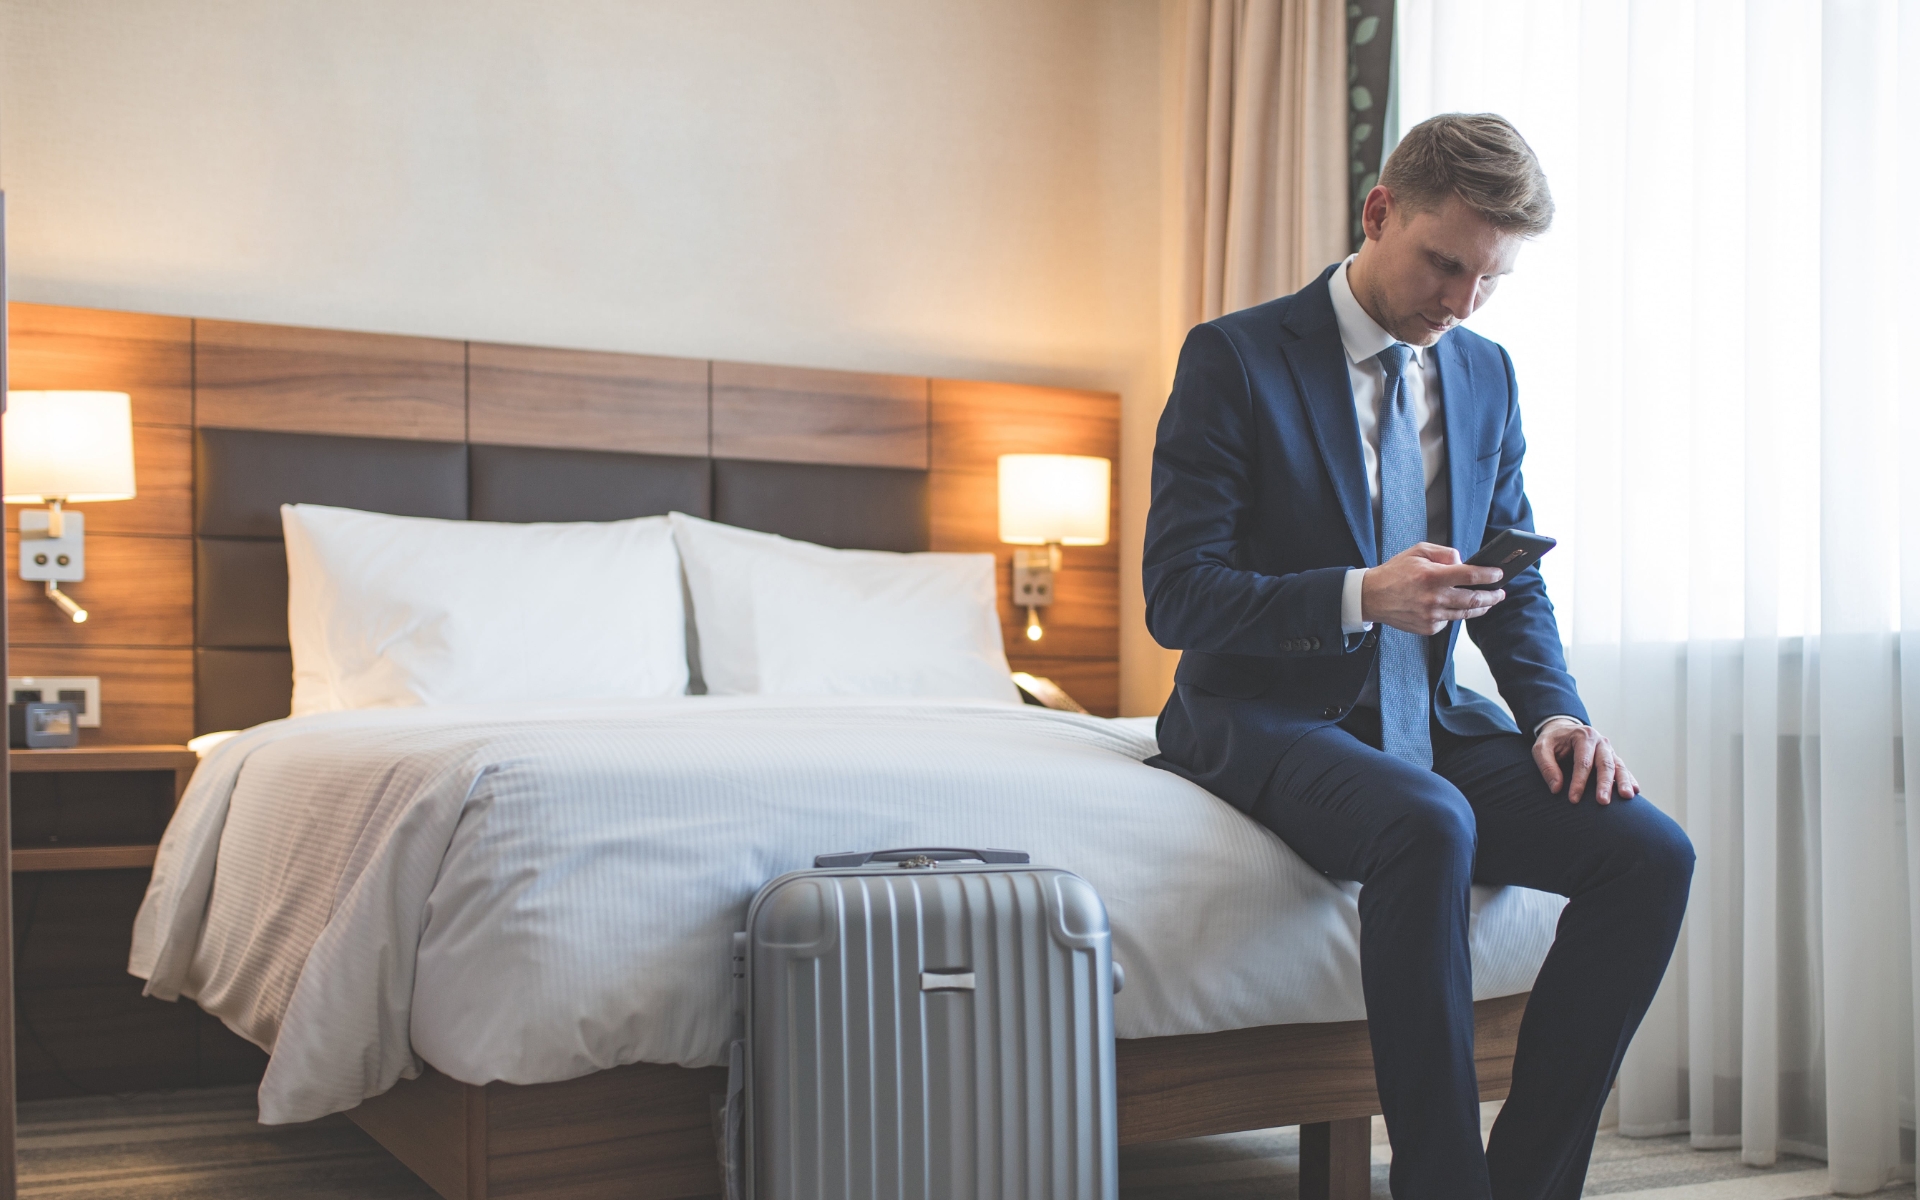 Guest checked into room using mobile device